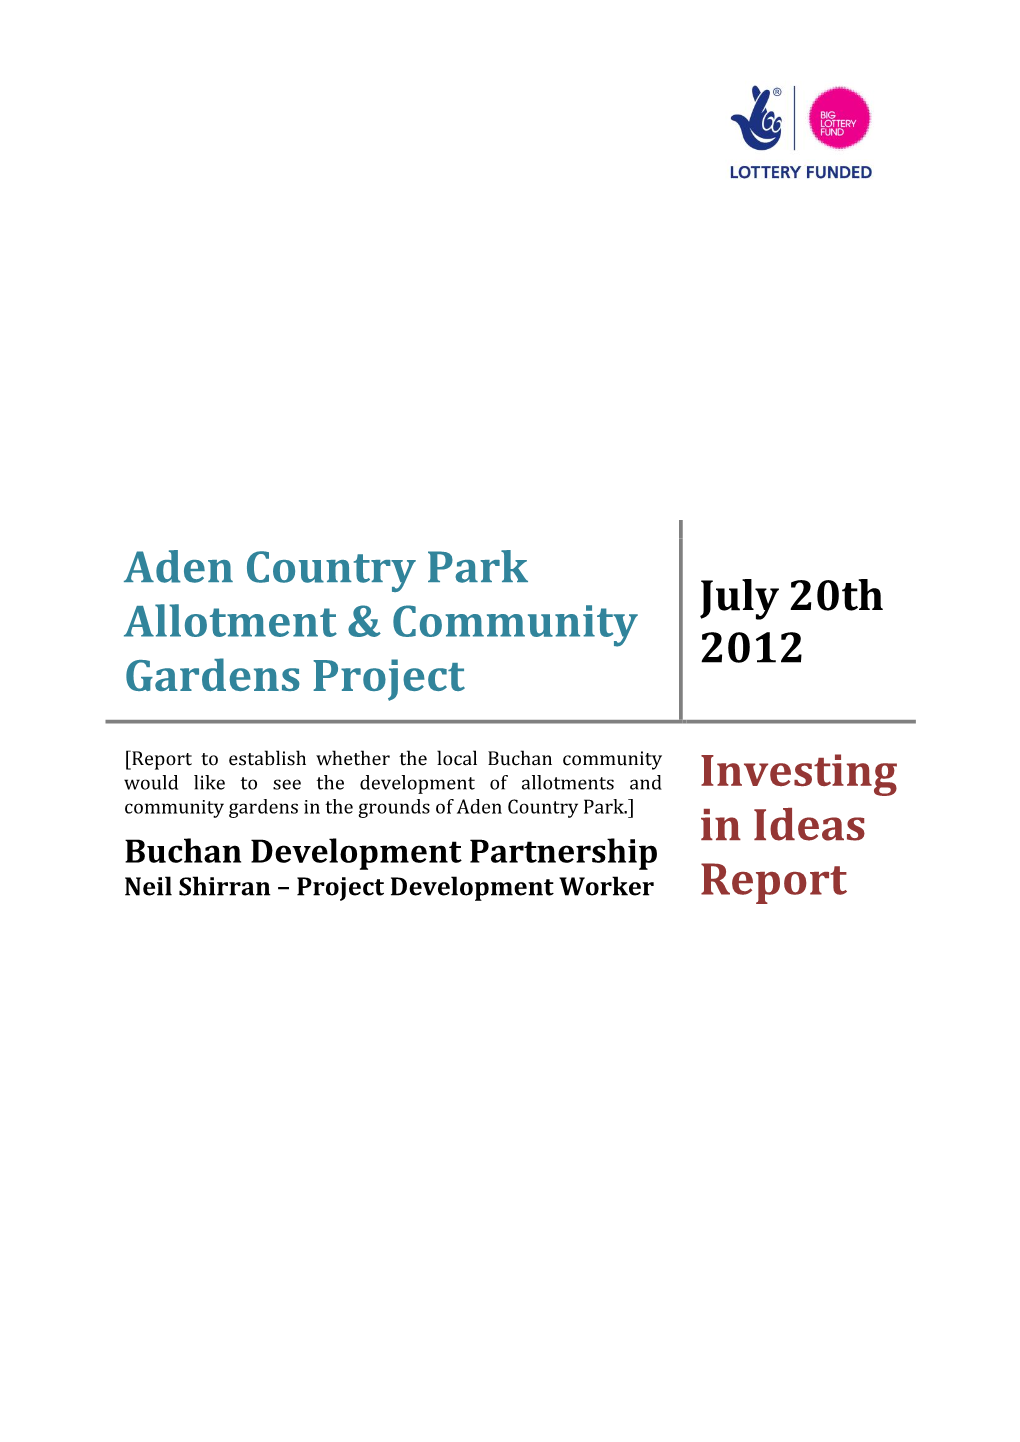 Aden Country Park Allotment & Community Gardens Project